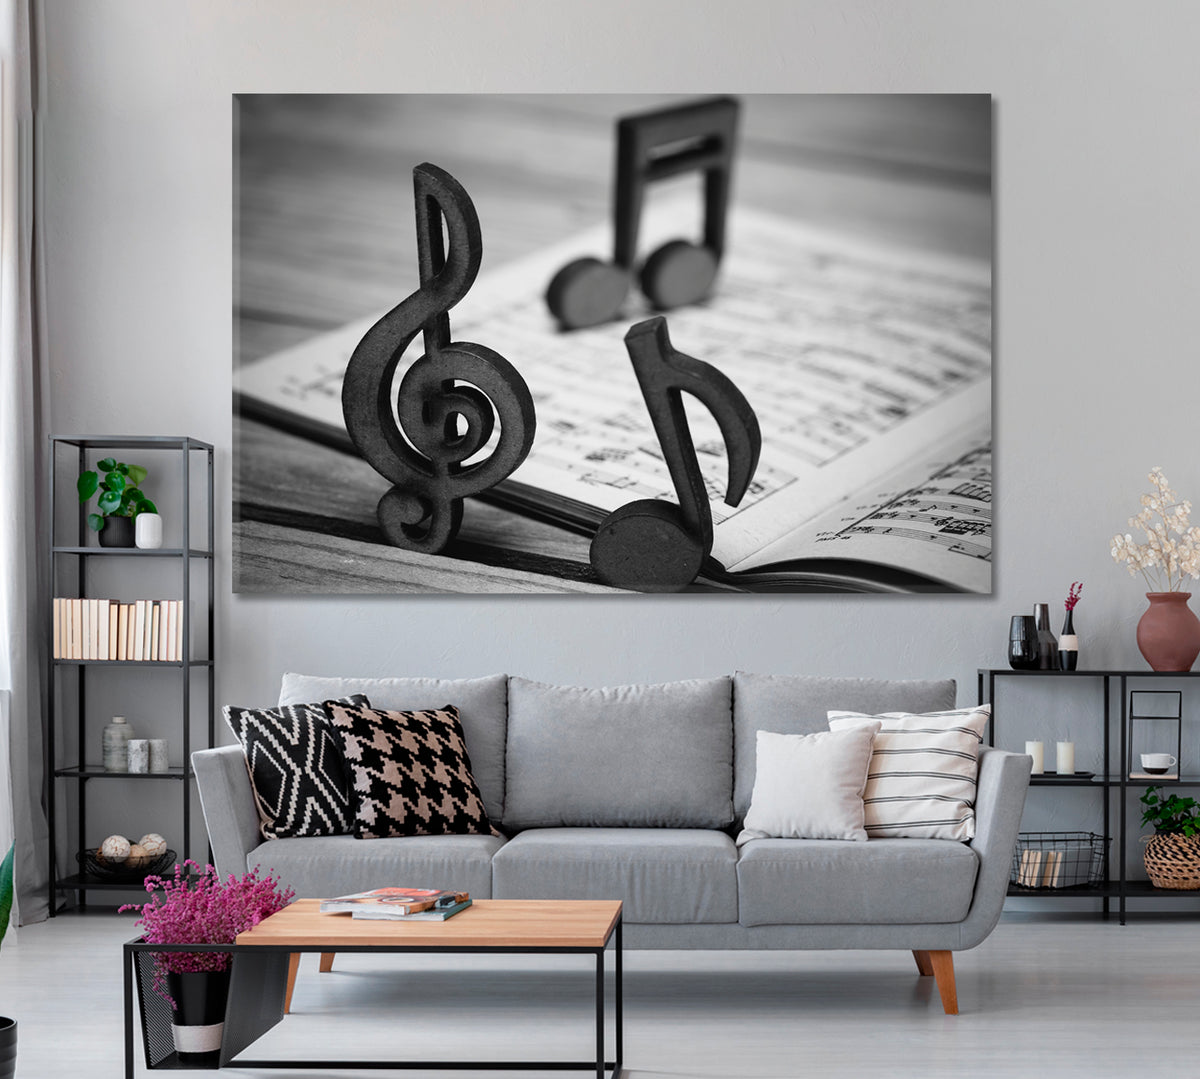 Vintage Wooden Music Notes Canvas Print ArtLexy 1 Panel 24"x16" inches 